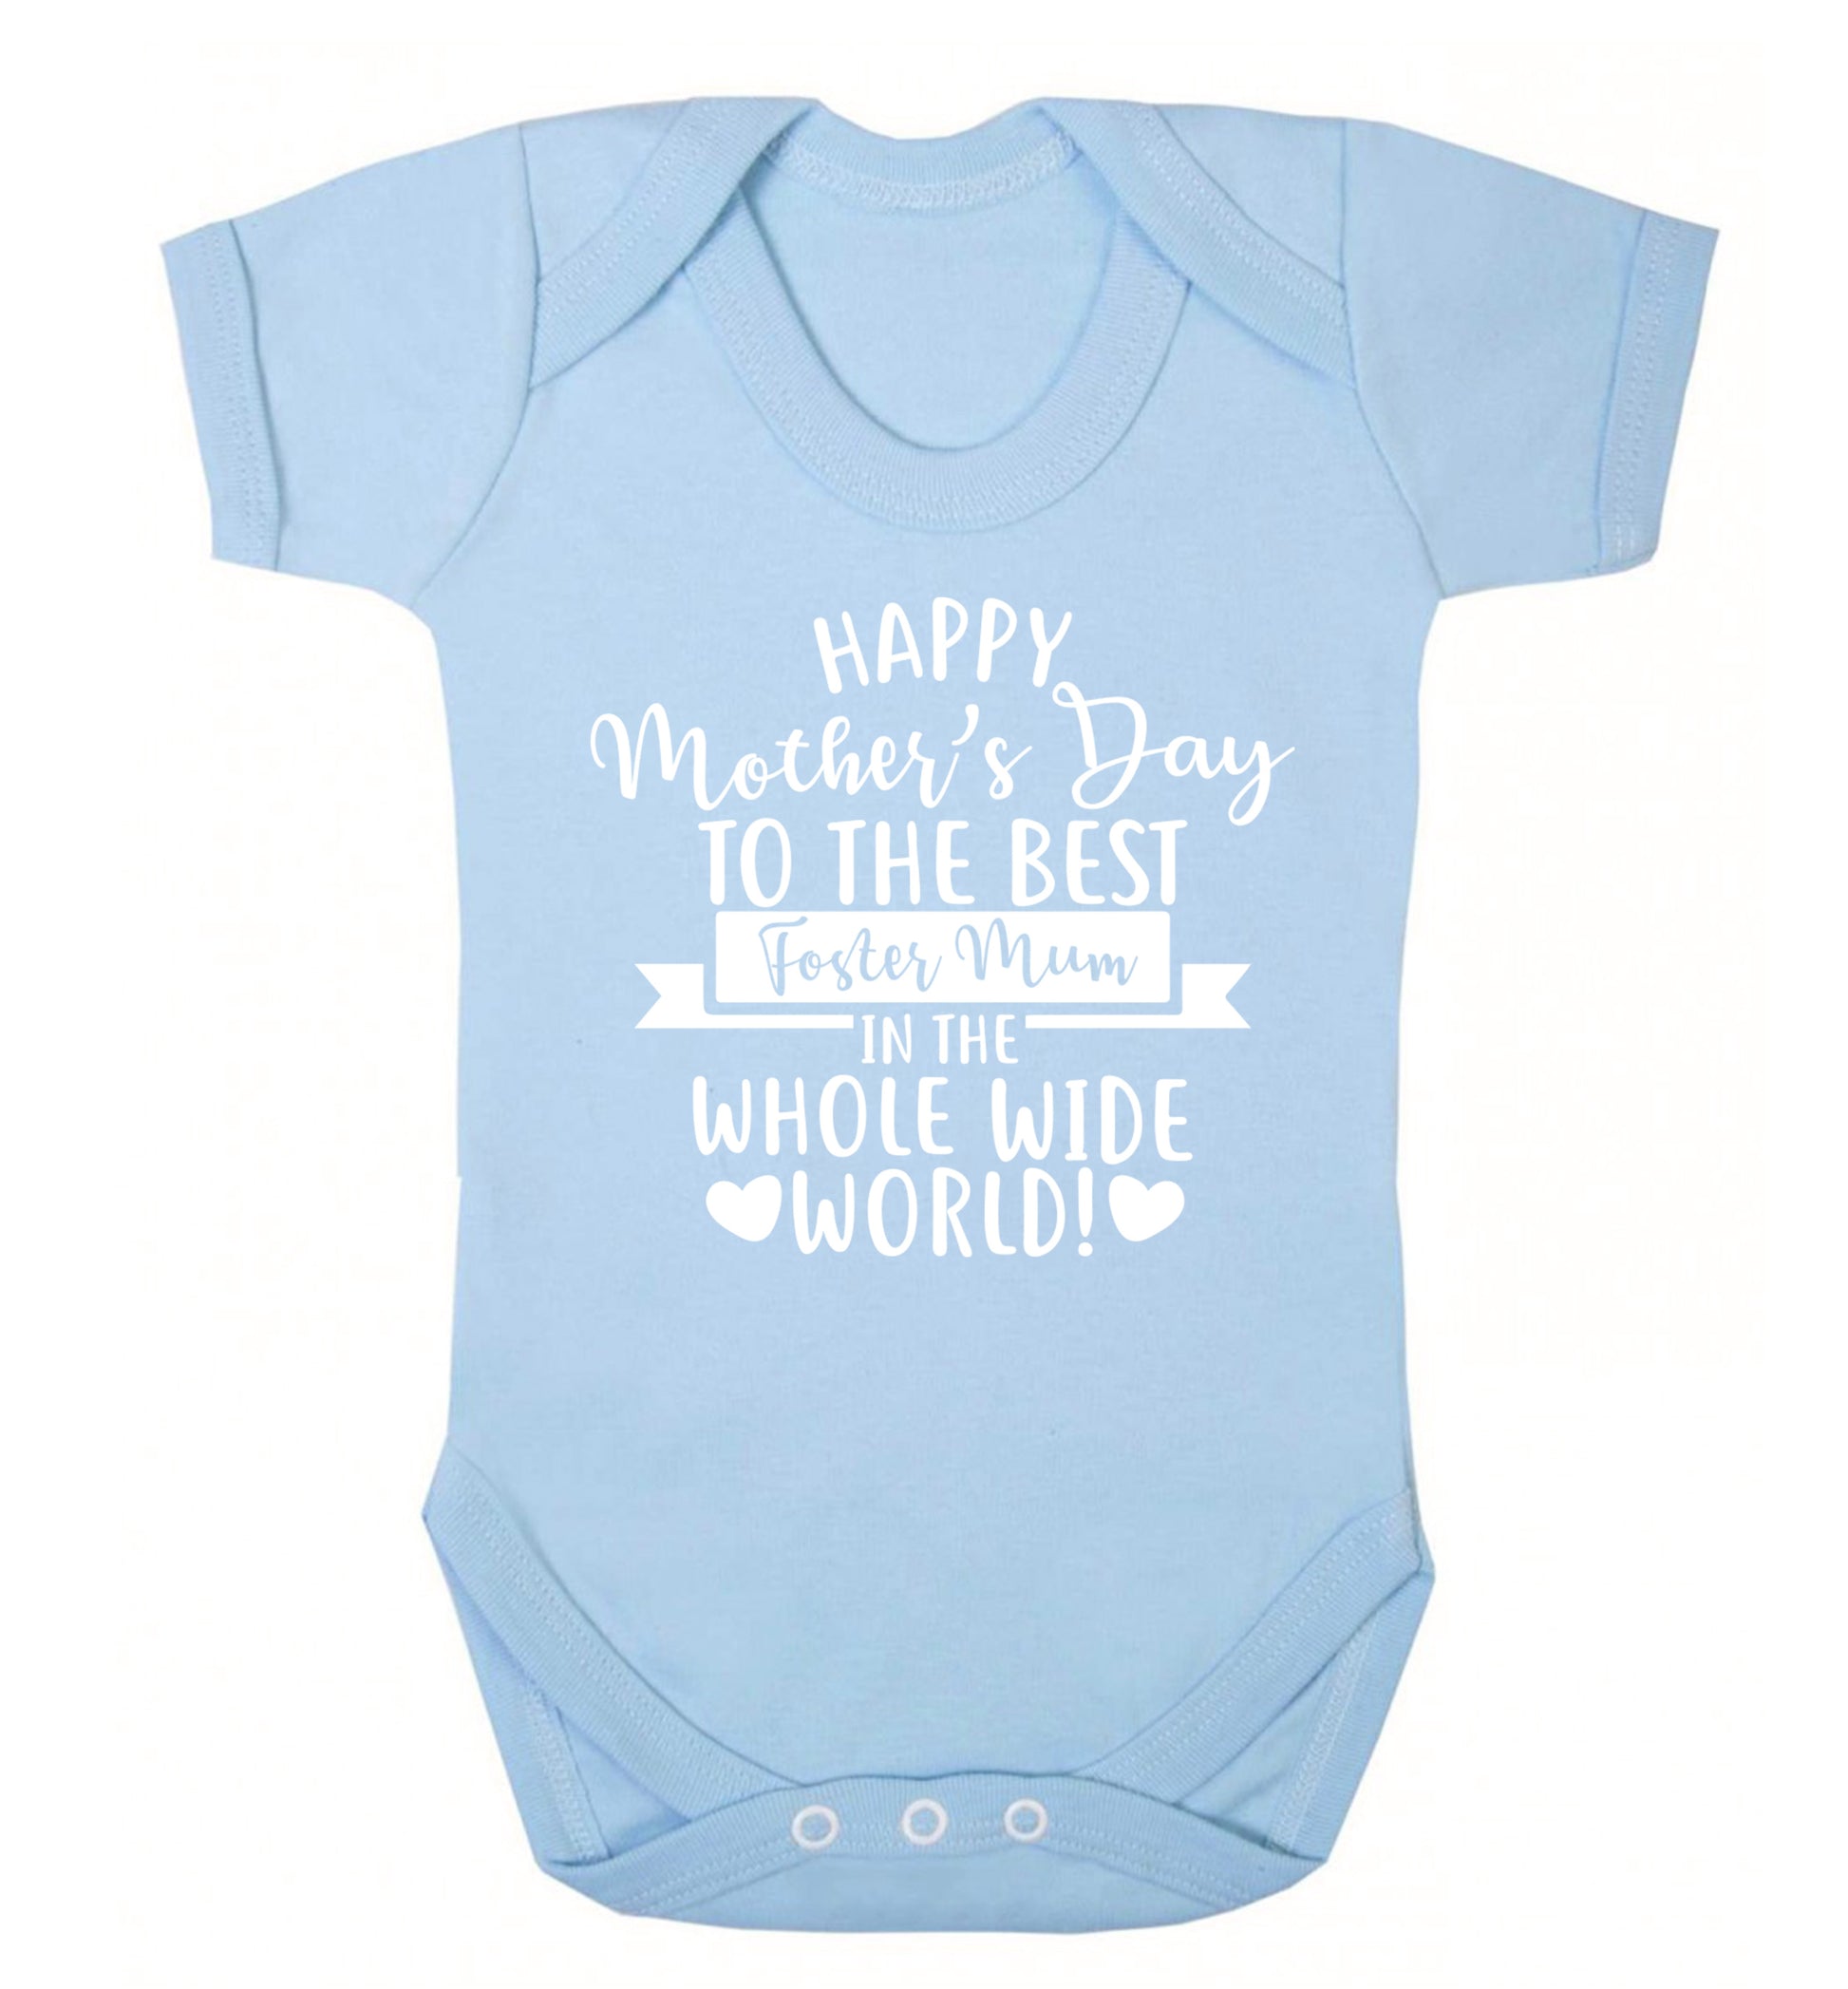 Happy mother's day to the best foster mum in the world Baby Vest pale blue 18-24 months